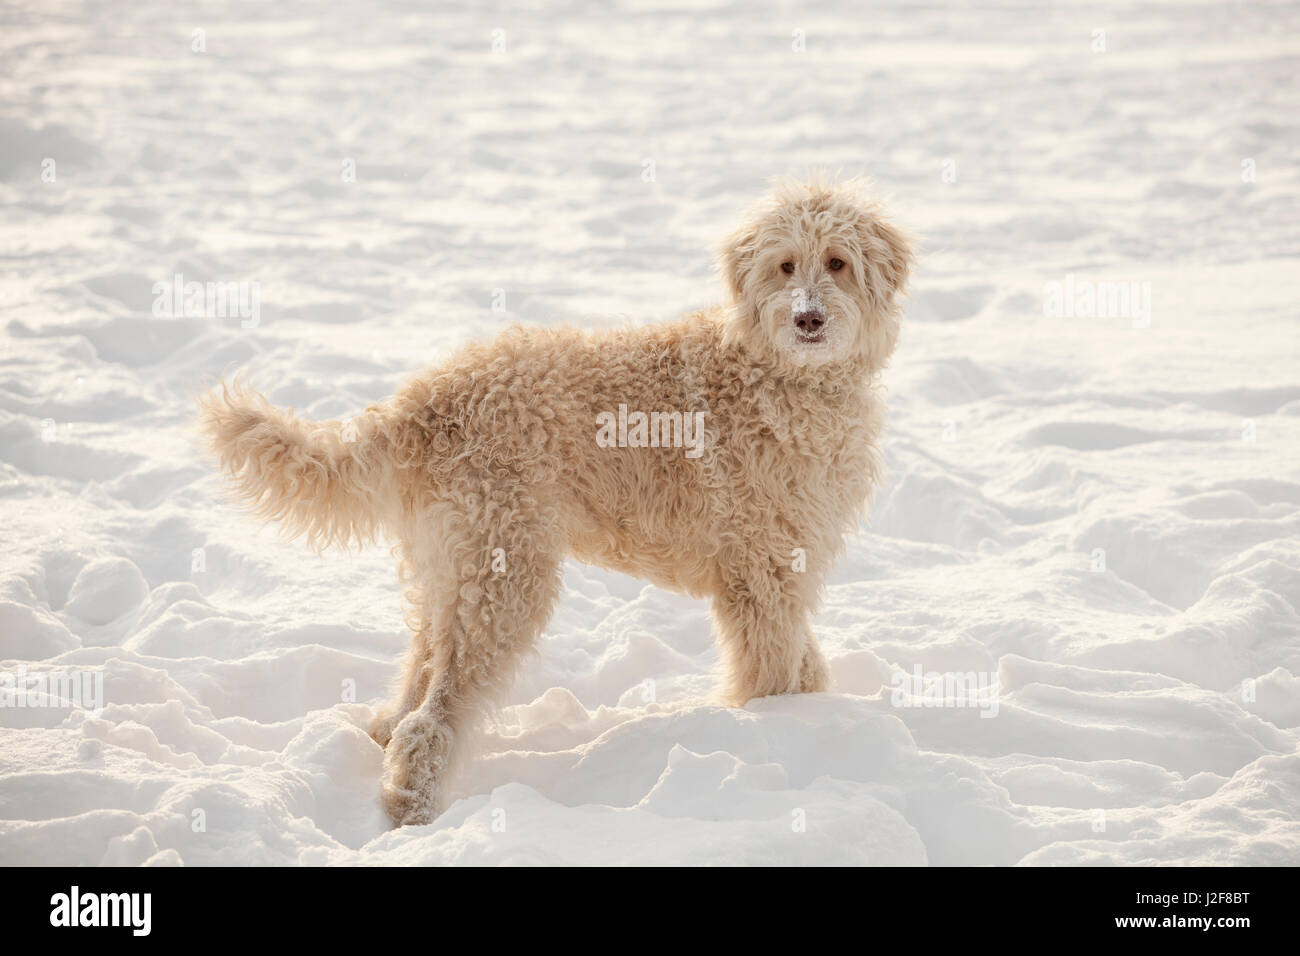 Snow Resolution Stock Images - Alamy